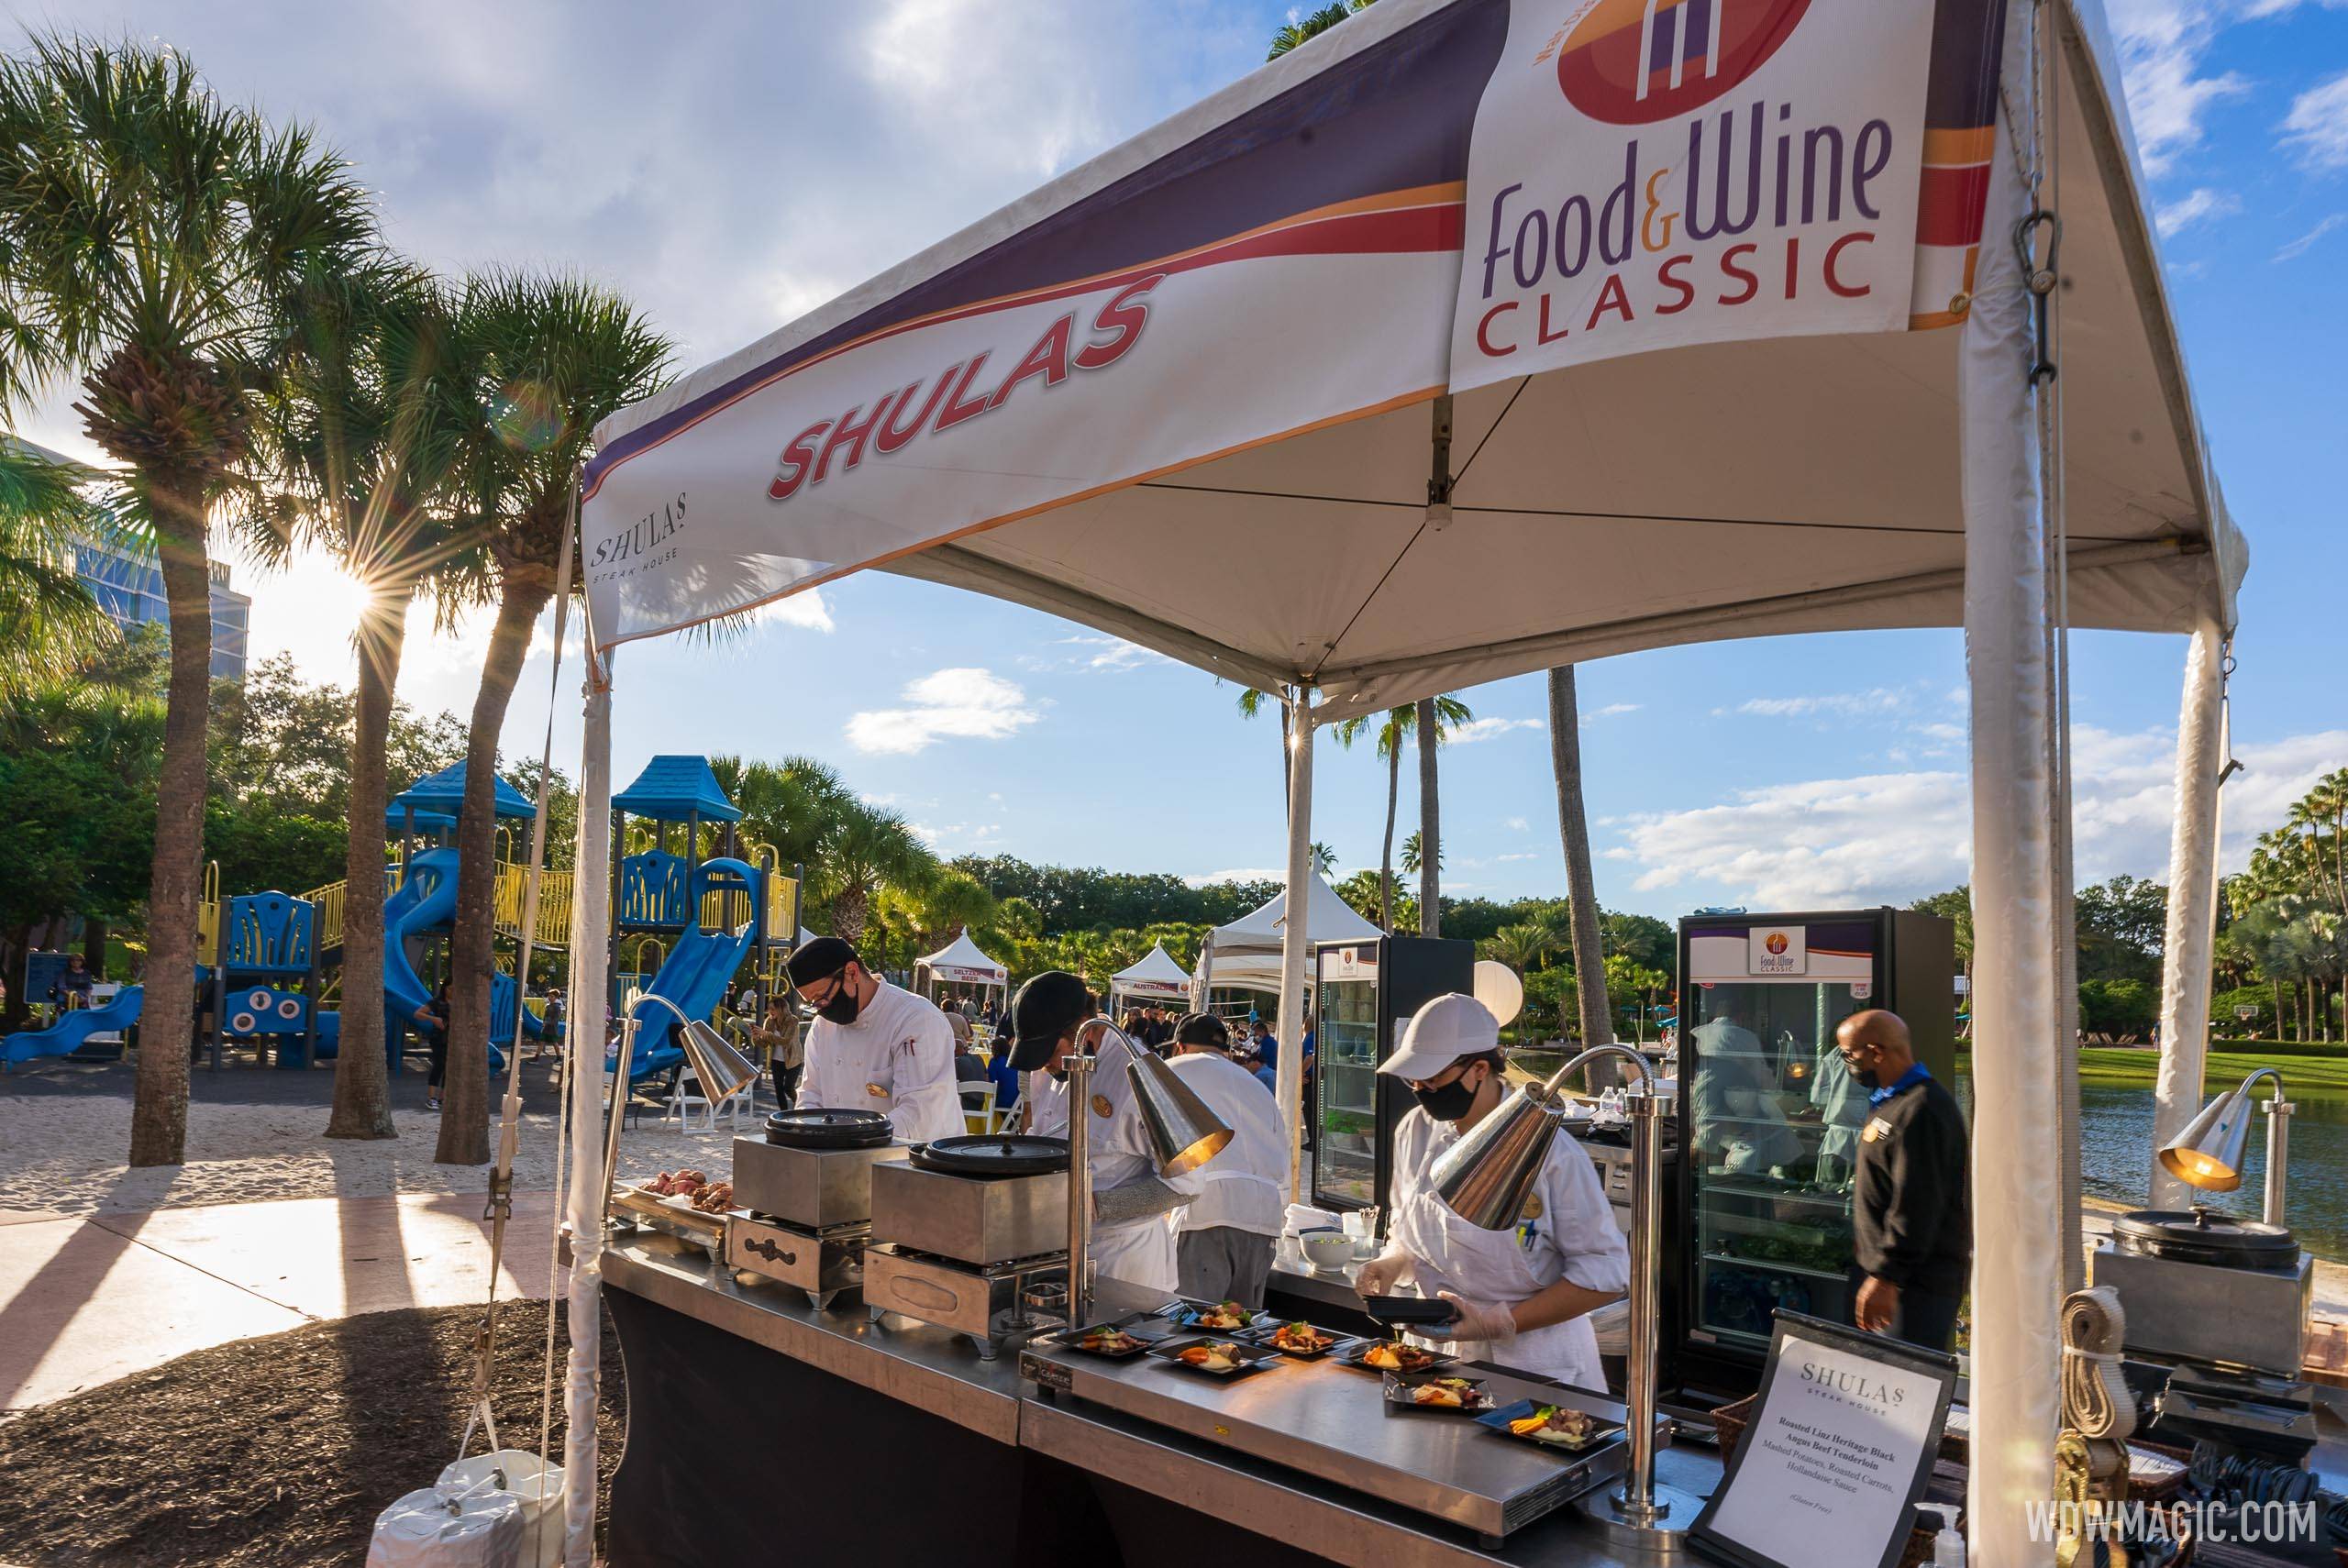 2021 Walt Disney World Swan and Dolphin Food and Wine Classic